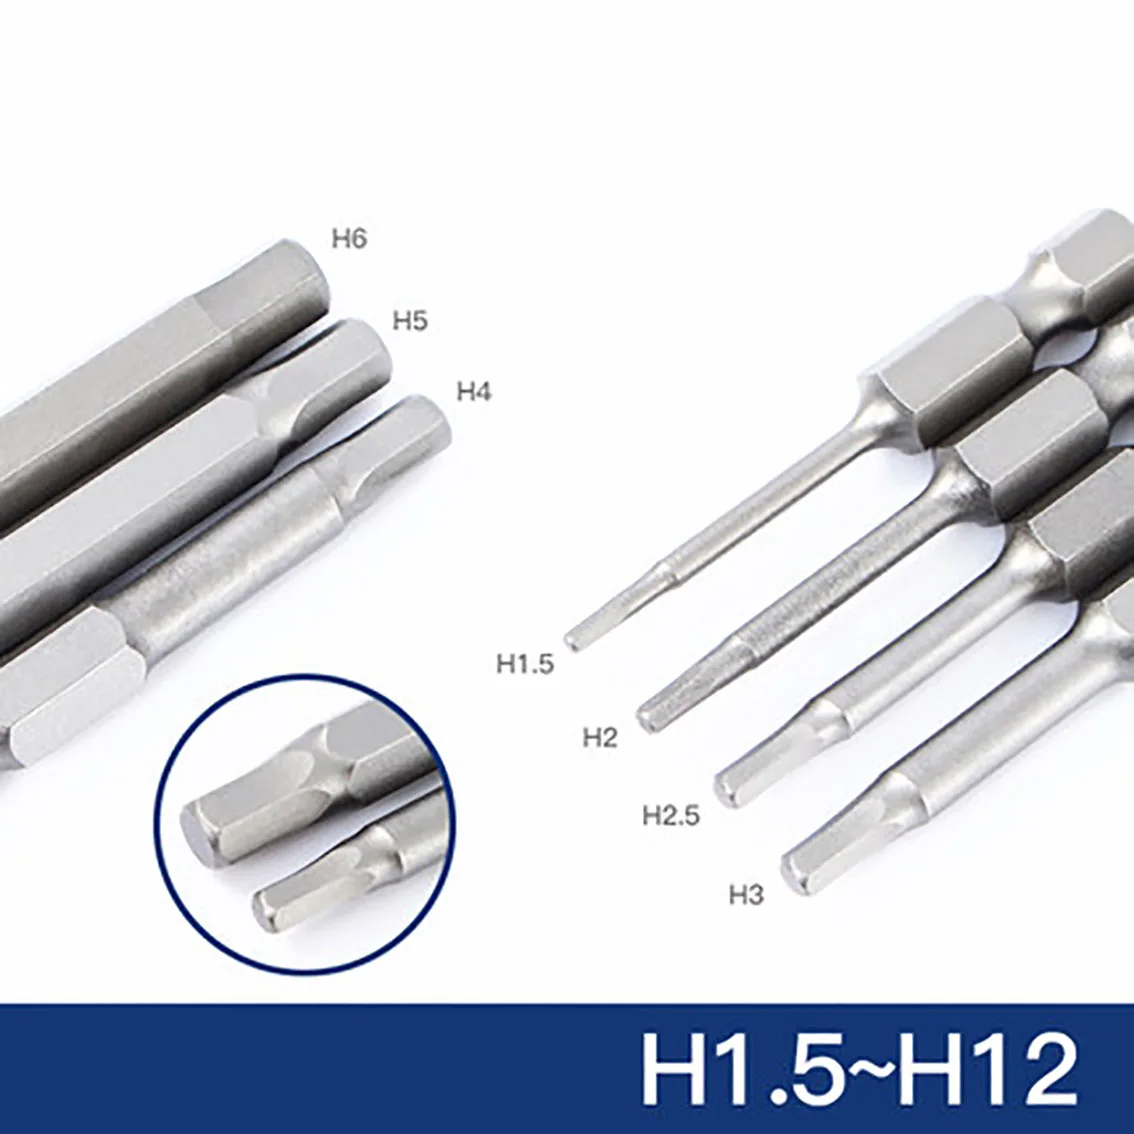 1Pcs Length 65mm Solid Screwdriver Drill Bits 1/4 inch Hex Shank Hexagon Head Bits H1.5-H14 Magnetic Wrench Tool